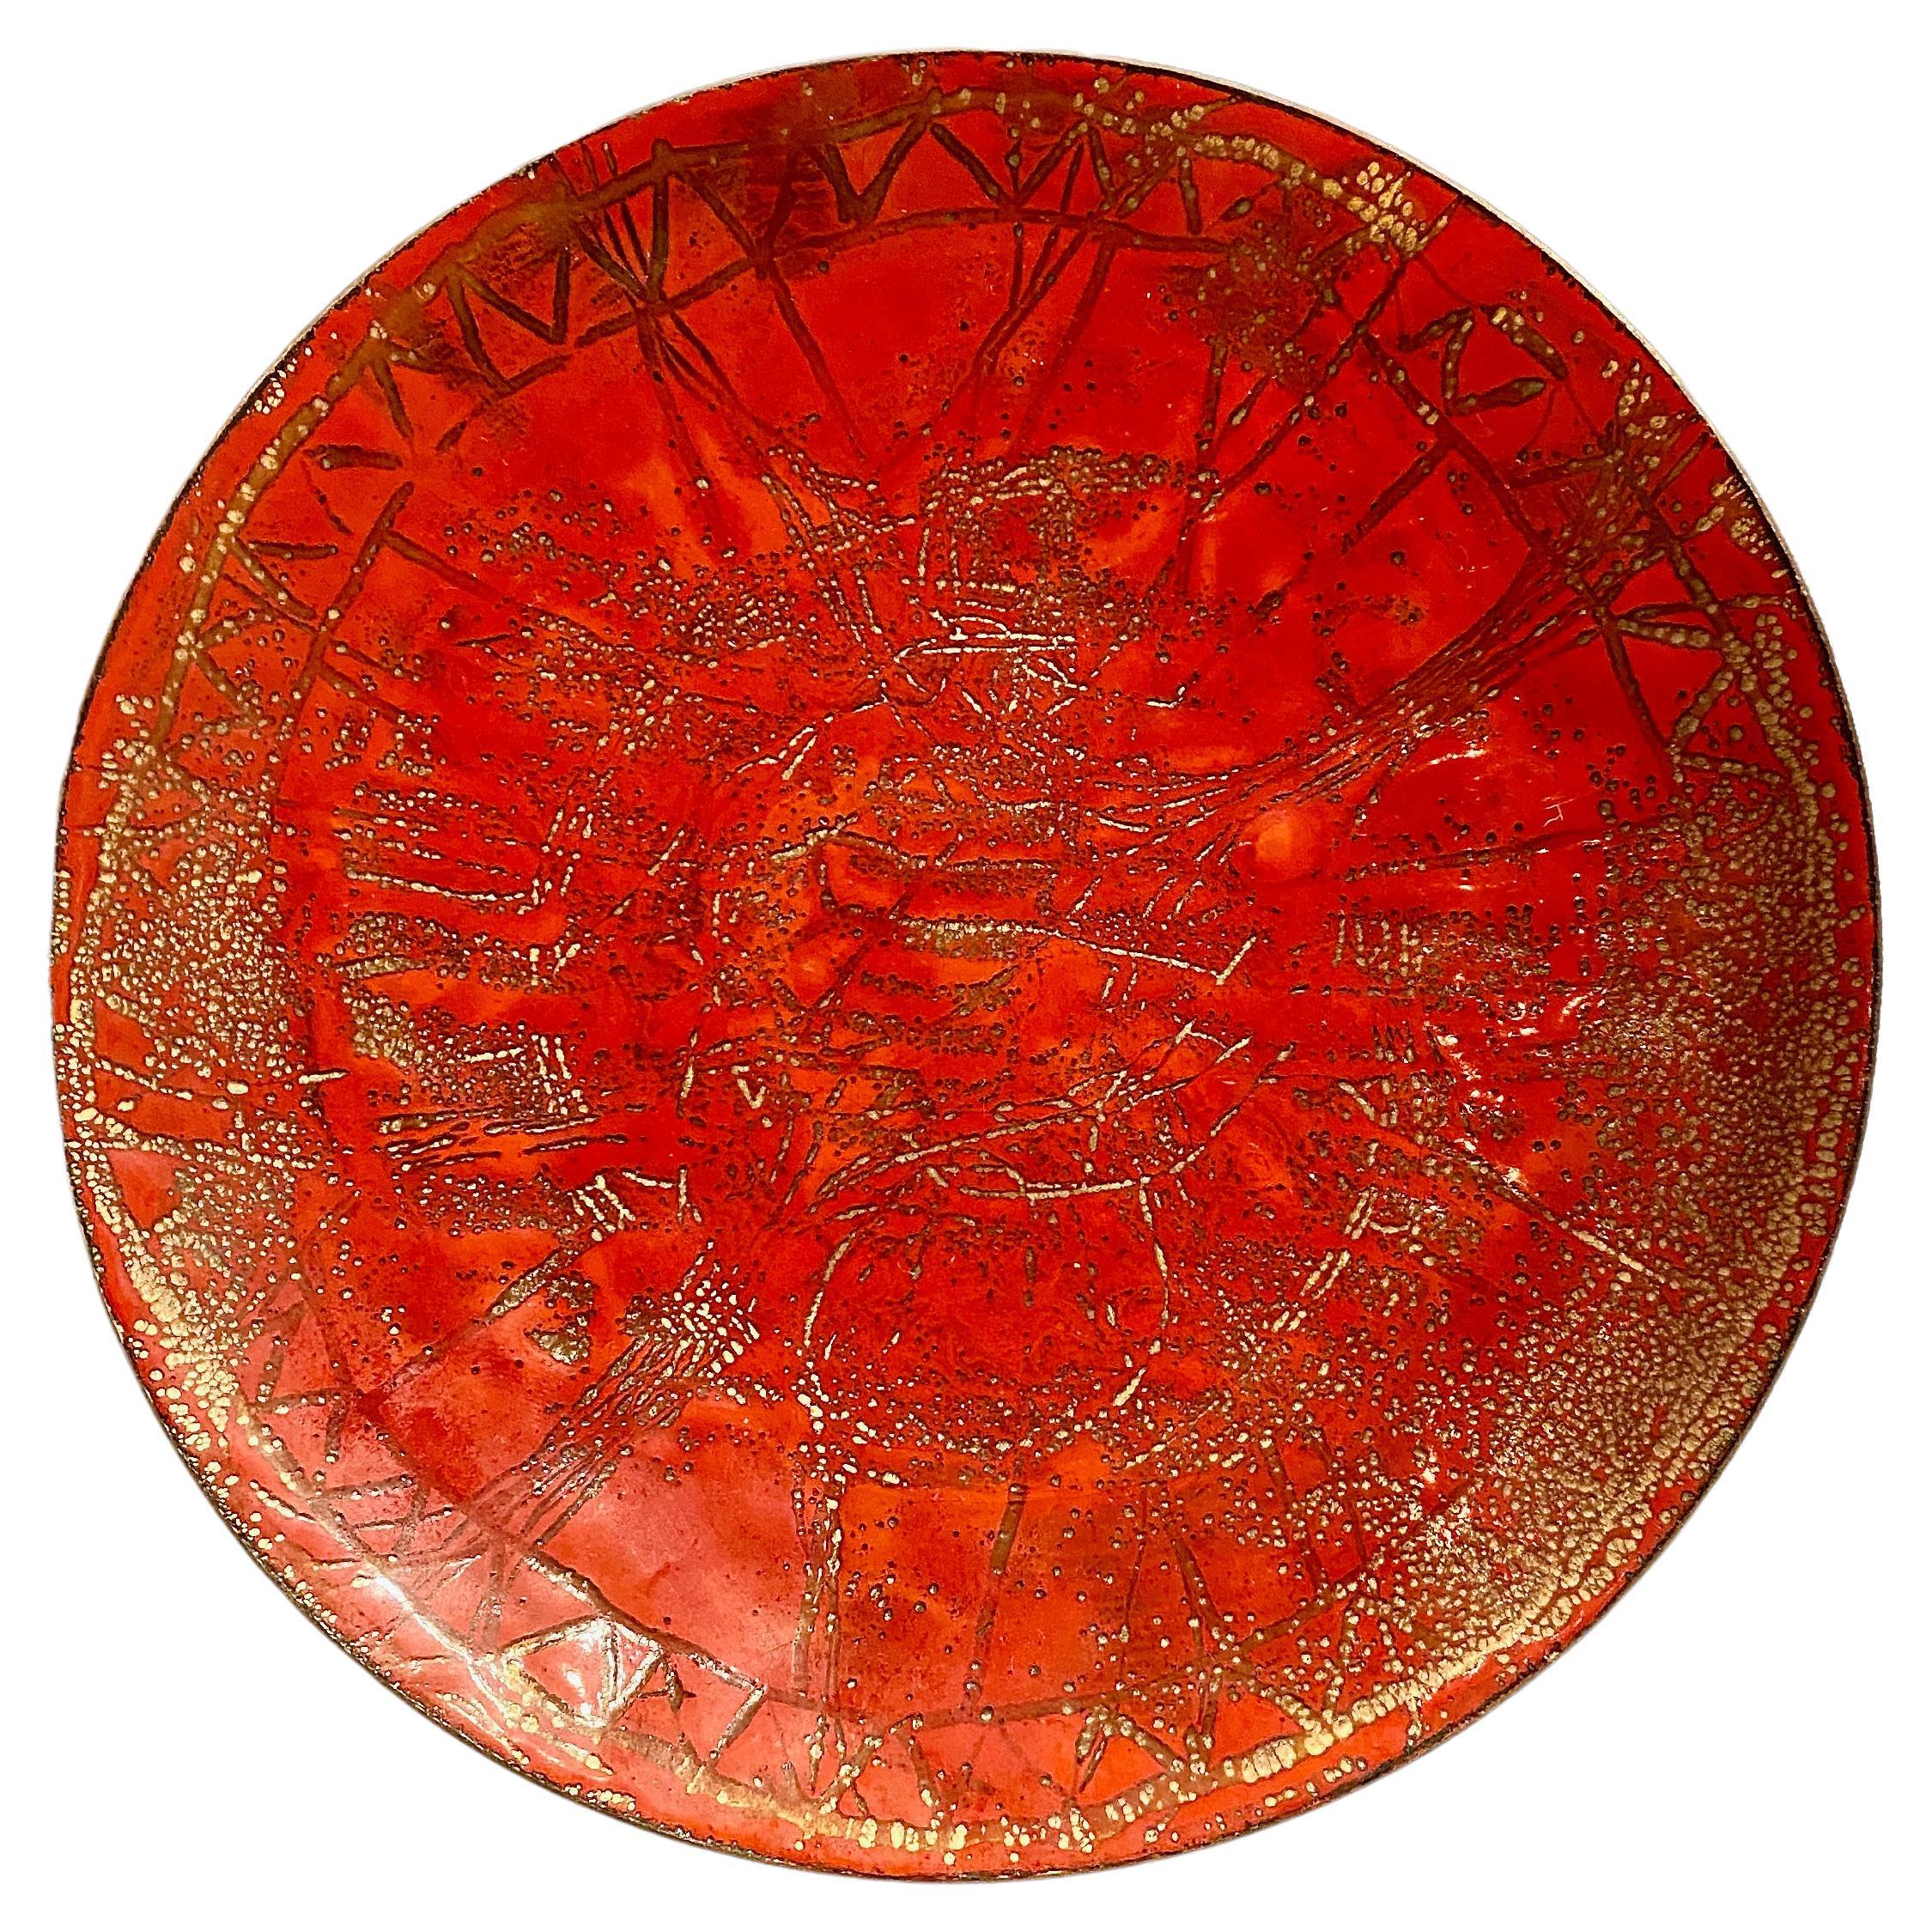 This is a stunning example of a mid-20th century enamel-on-copper vide-poche or catchall. The intense red of the enamel is detailed with abstract graphic designs and is further enhanced by a multitude of tiny bubbles creating several levels of light